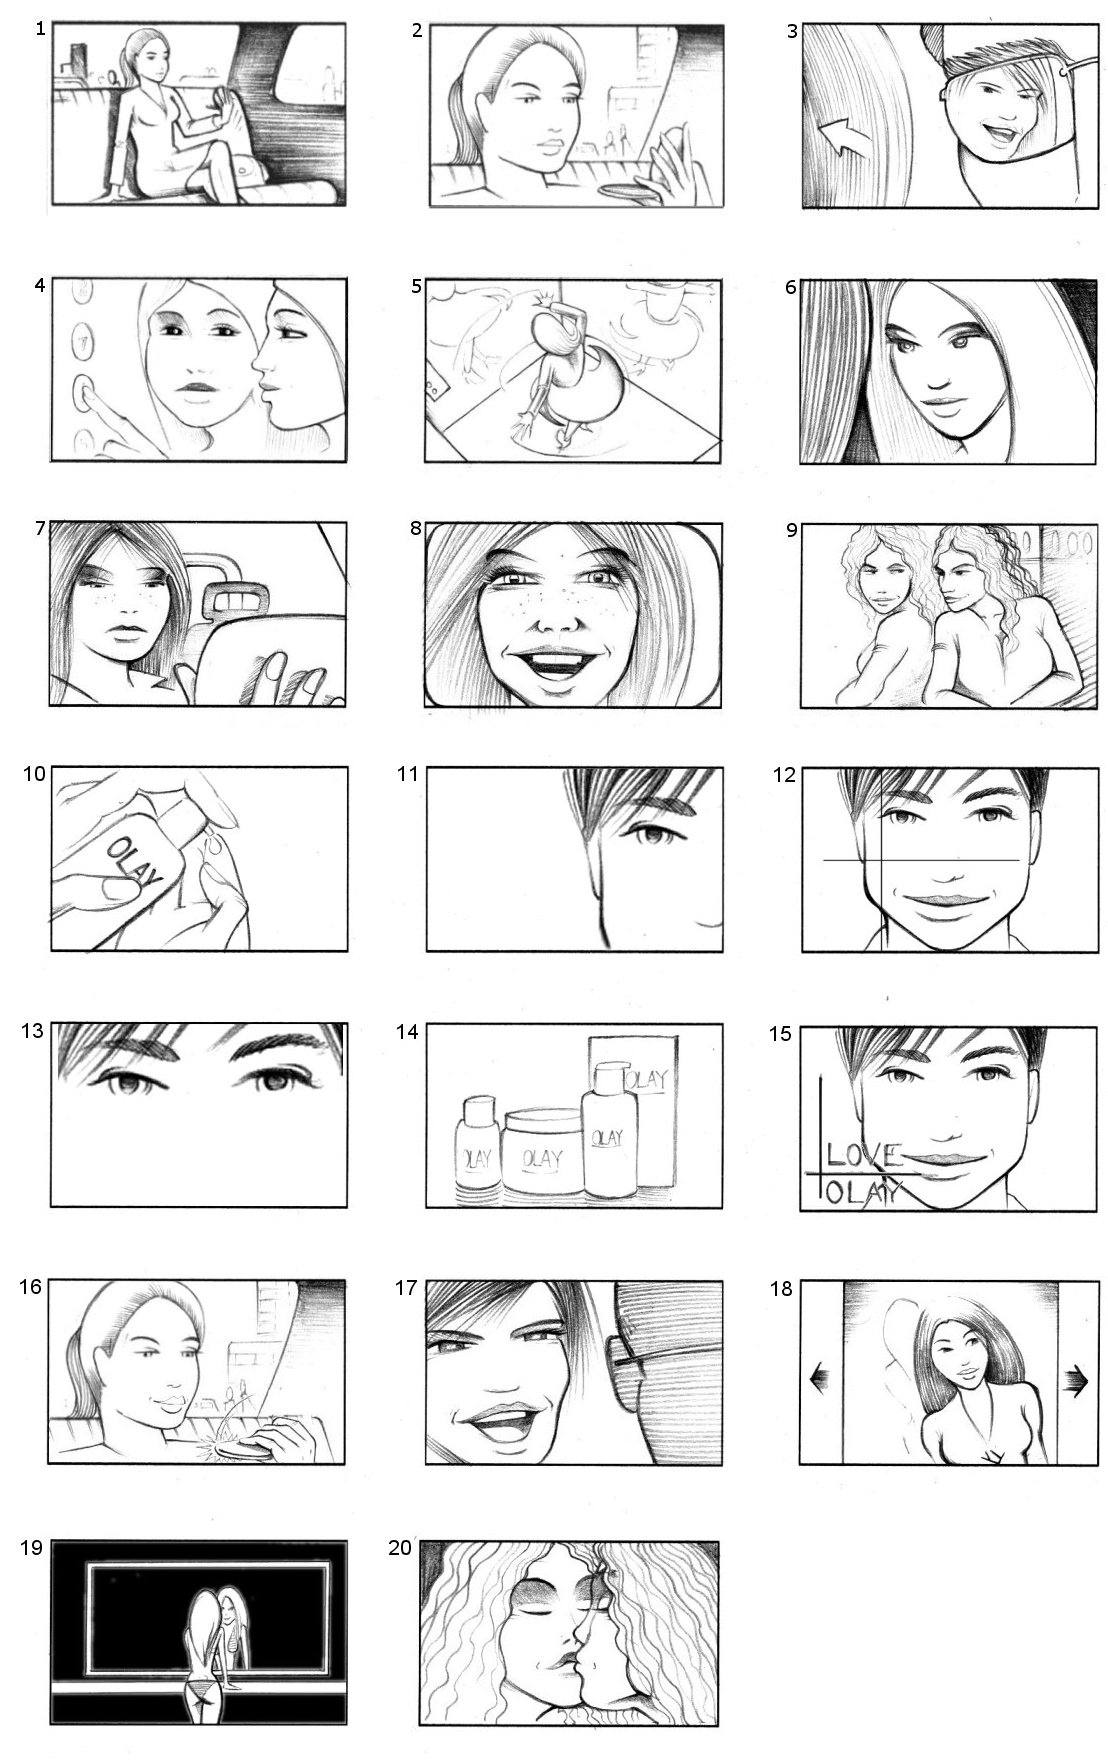 'LOVE OLAY' STORYBOARDS BY ANDY SPARROW